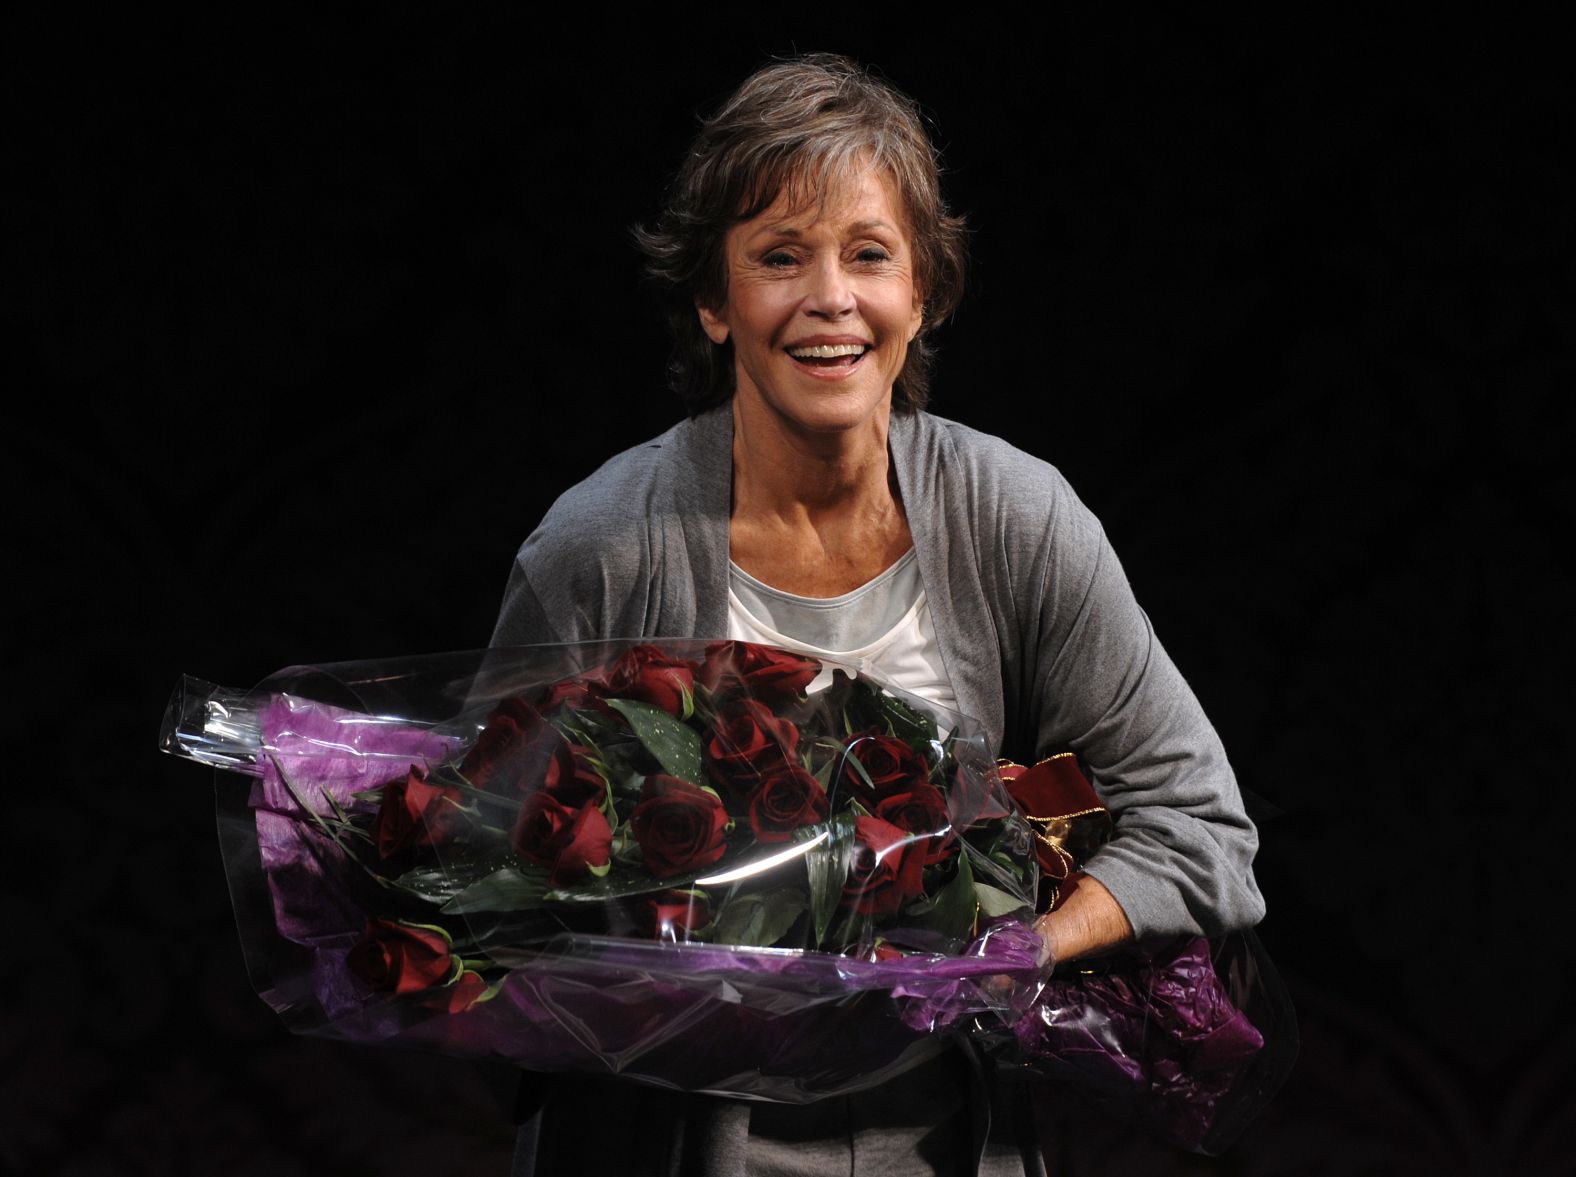 Fonda takes a bow during the curtain call for the Broadway play "33 Variations" in 2009.